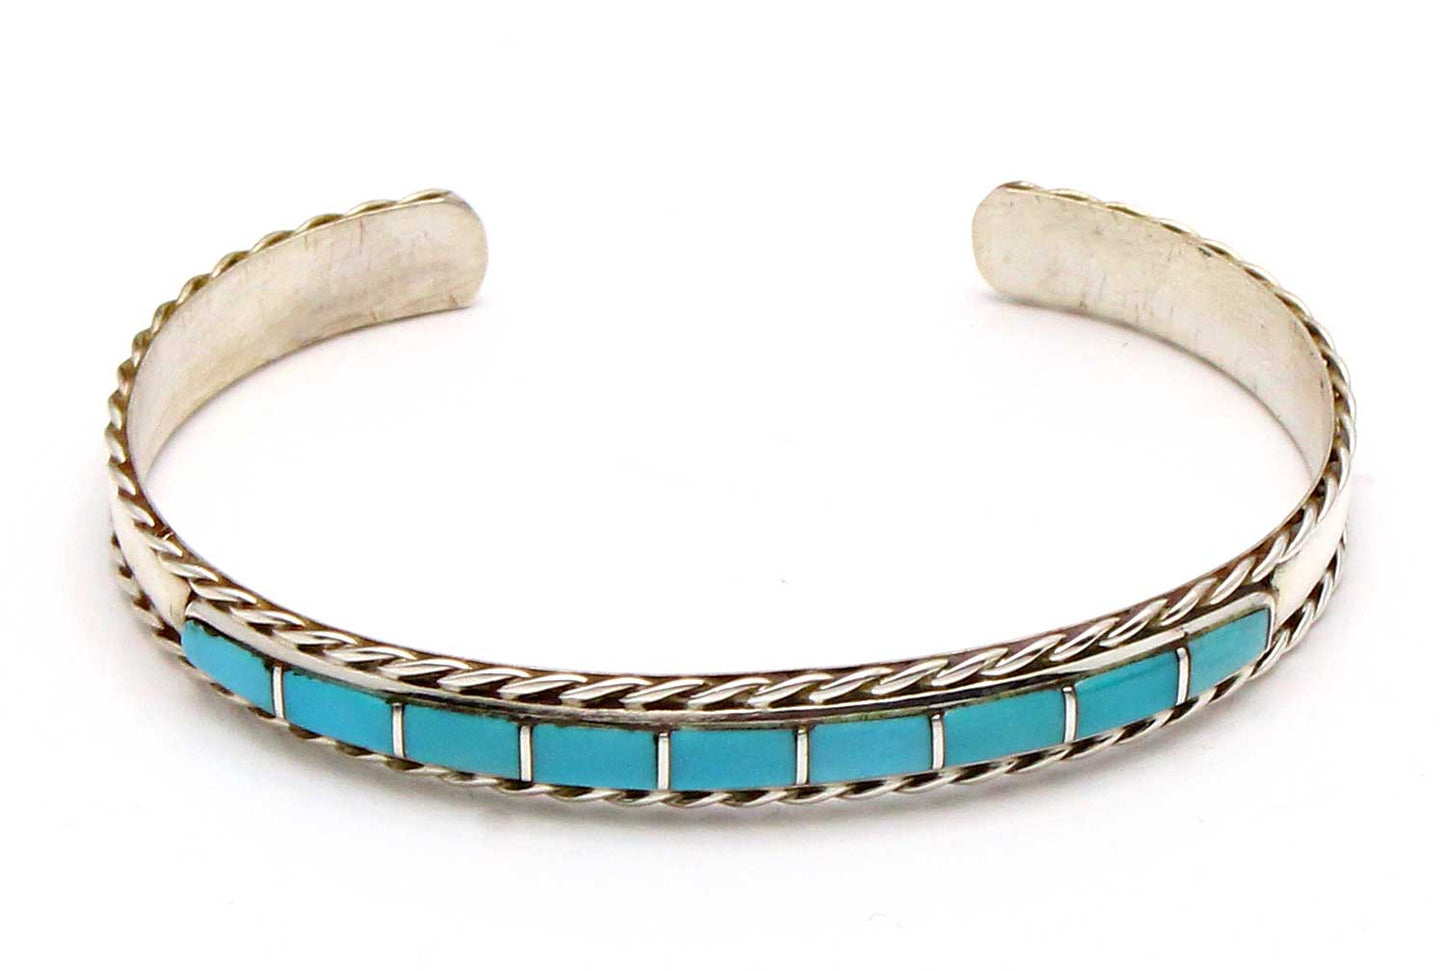 Zuni Turquoise & Silver Inlay Bracelet by Chavez